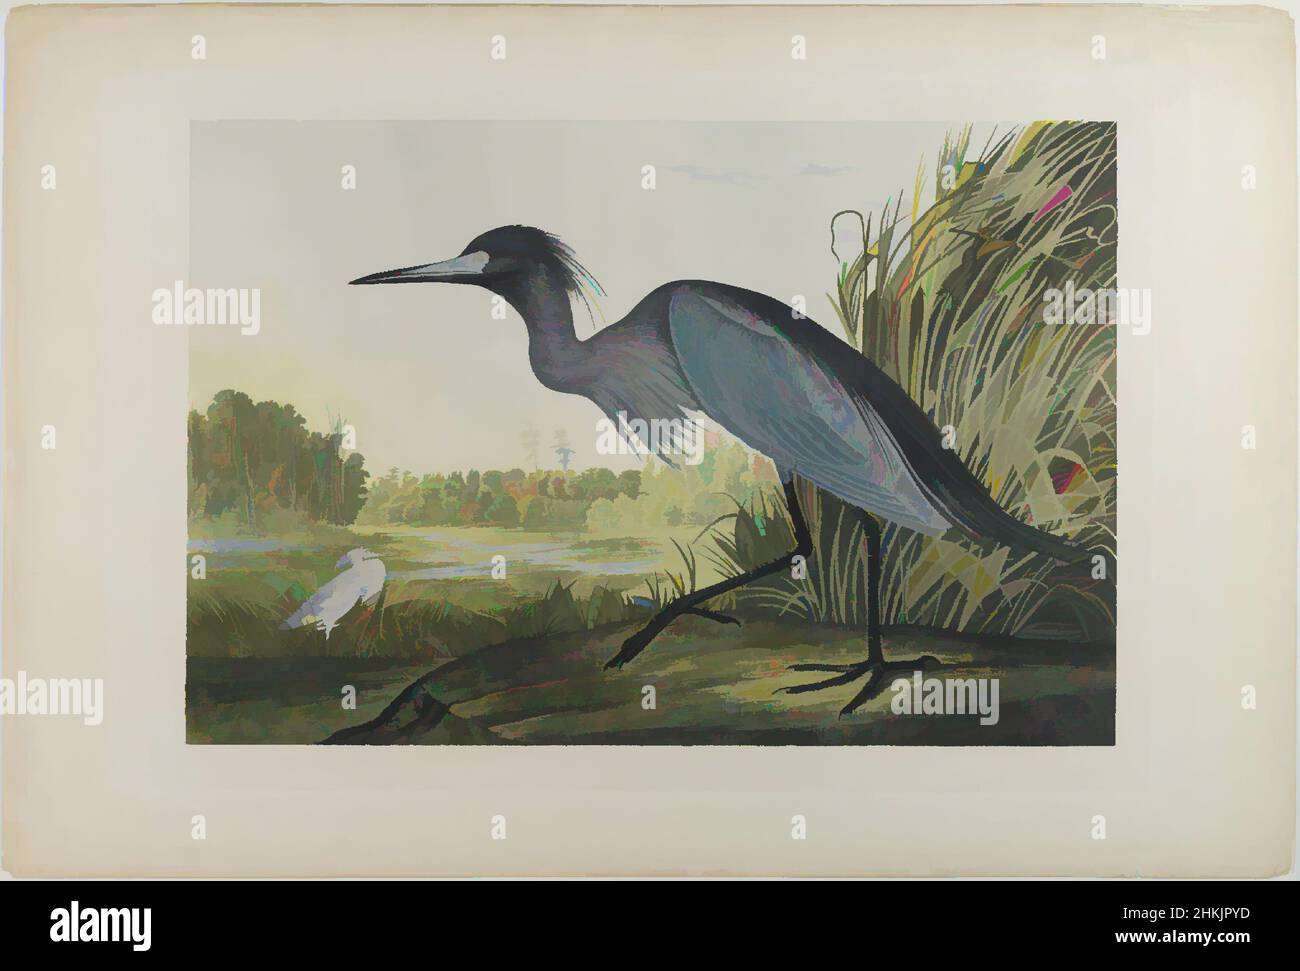 Art inspired by Blue Crane or Heron, John James Audubon, American, born Haiti, 1785-1851, Chromolithograph, 1861, sheet: 27 x 39 3/4 in., 68.6 x 101.0 cm;, Ardea coerula, birds, Charleston, fauna, flora, grasses, nature study, ornithology, South Carolina, trees, water, waterfowl, Classic works modernized by Artotop with a splash of modernity. Shapes, color and value, eye-catching visual impact on art. Emotions through freedom of artworks in a contemporary way. A timeless message pursuing a wildly creative new direction. Artists turning to the digital medium and creating the Artotop NFT Stock Photo